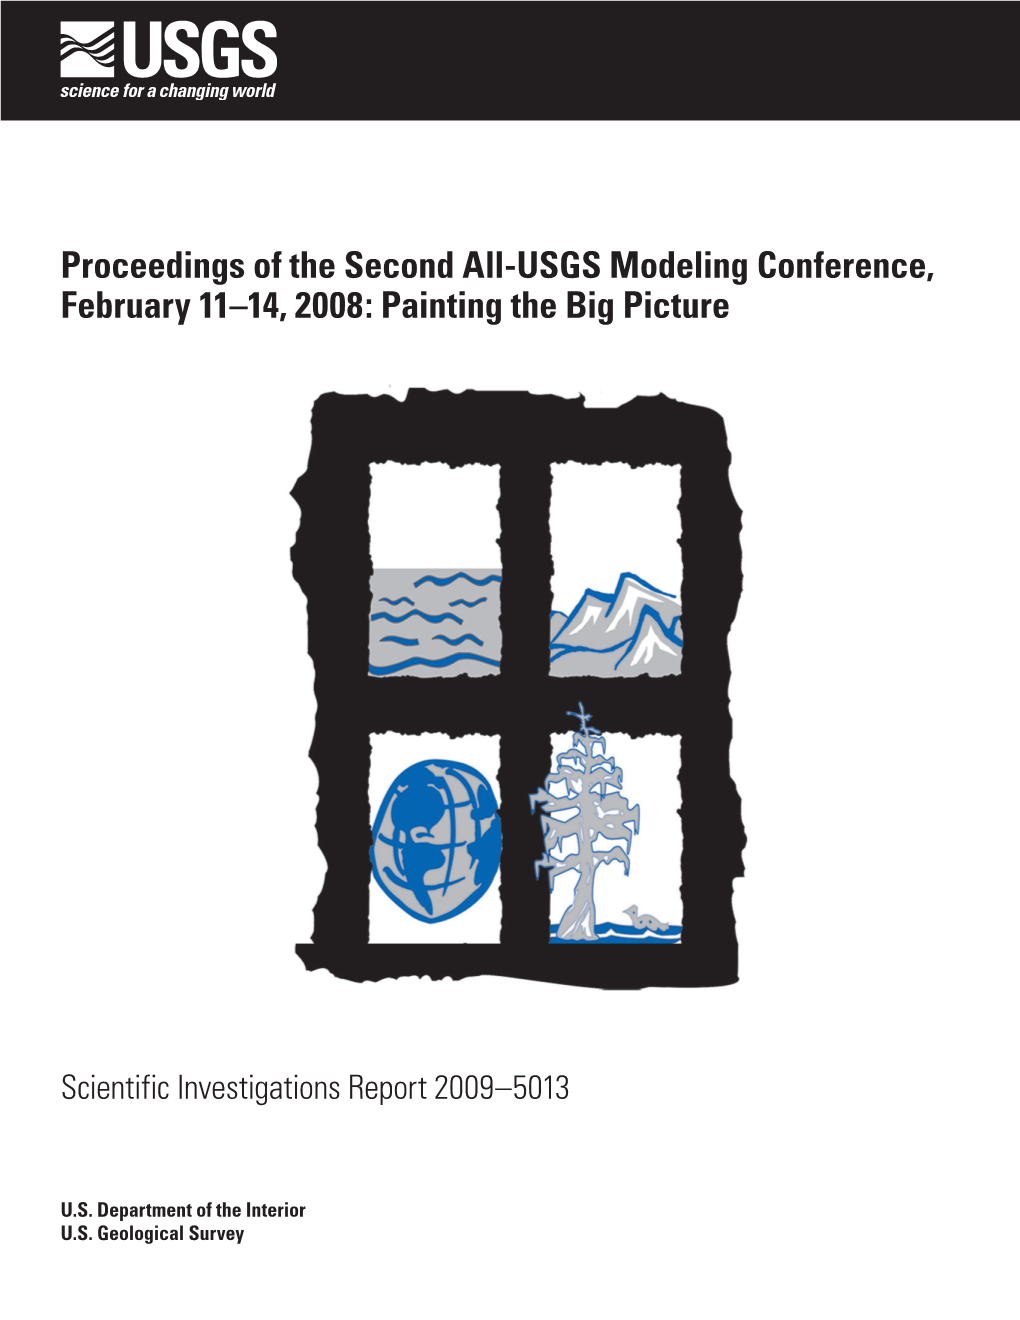 Proceedings of the Second All-USGS Modeling Conference, February 11–14, 2008: Painting the Big Picture